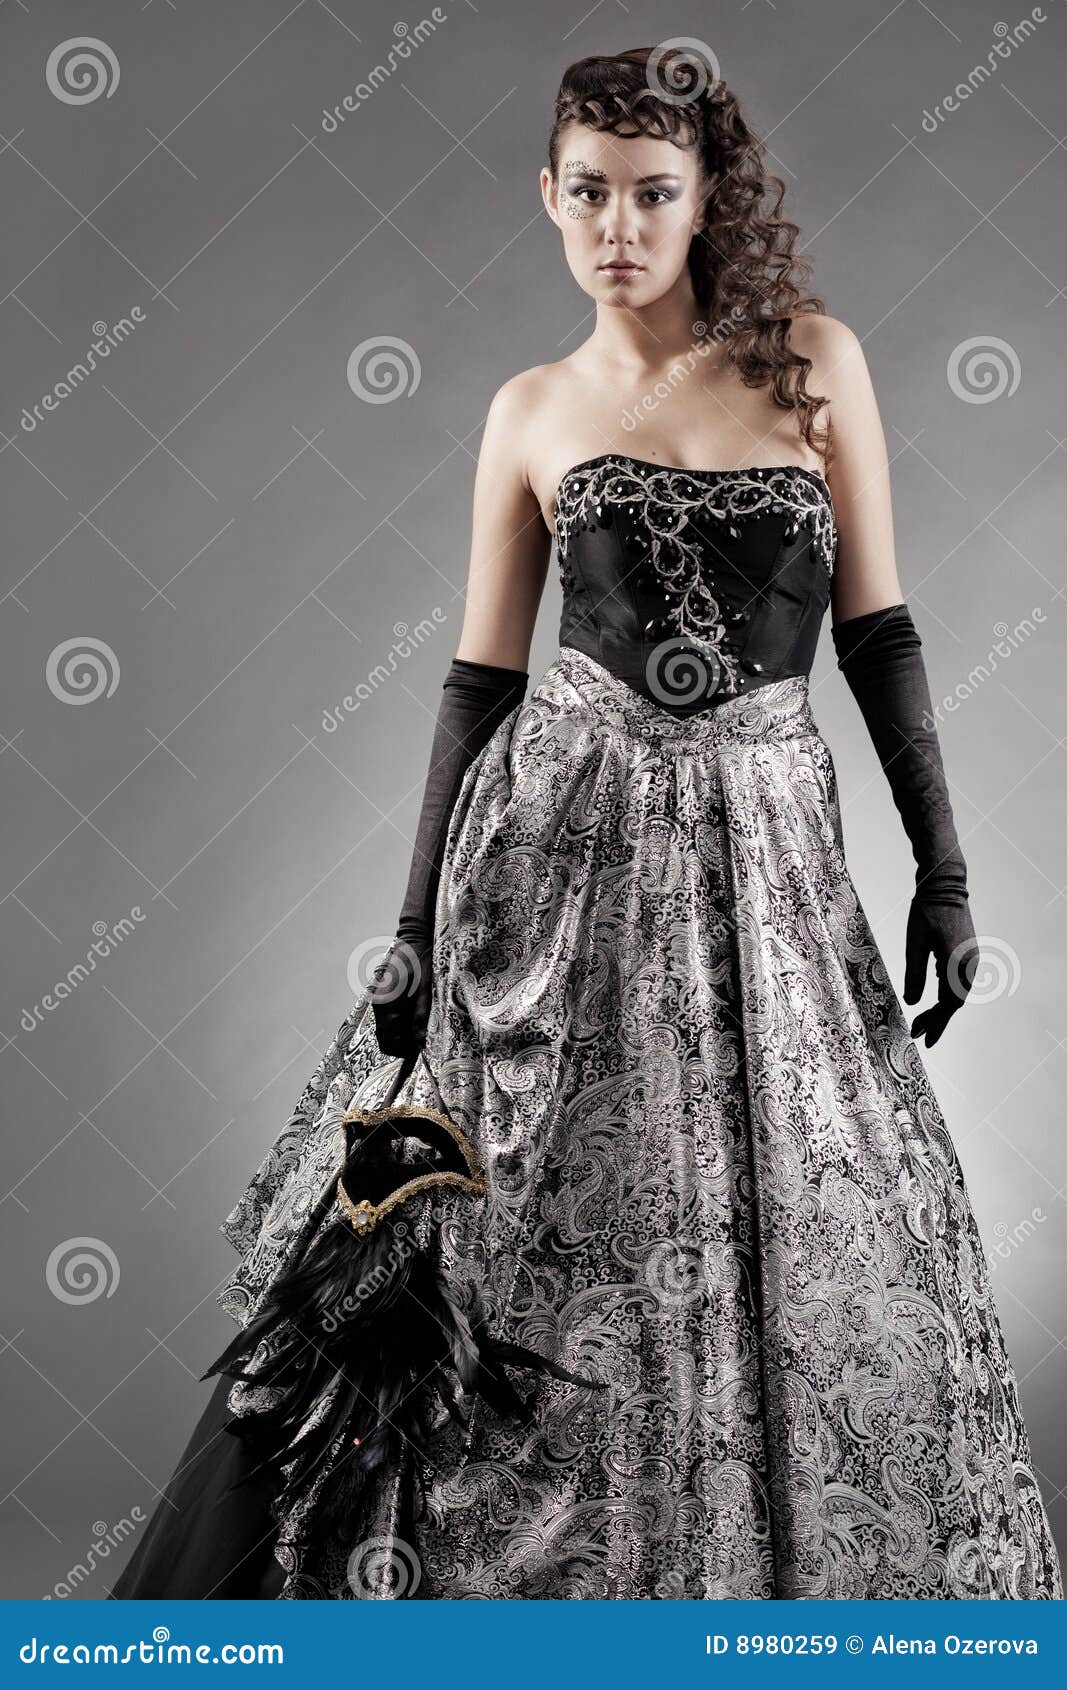 Woman Wearing Masquerade Costume Stock Image - Image of feather, decoration: 8980259